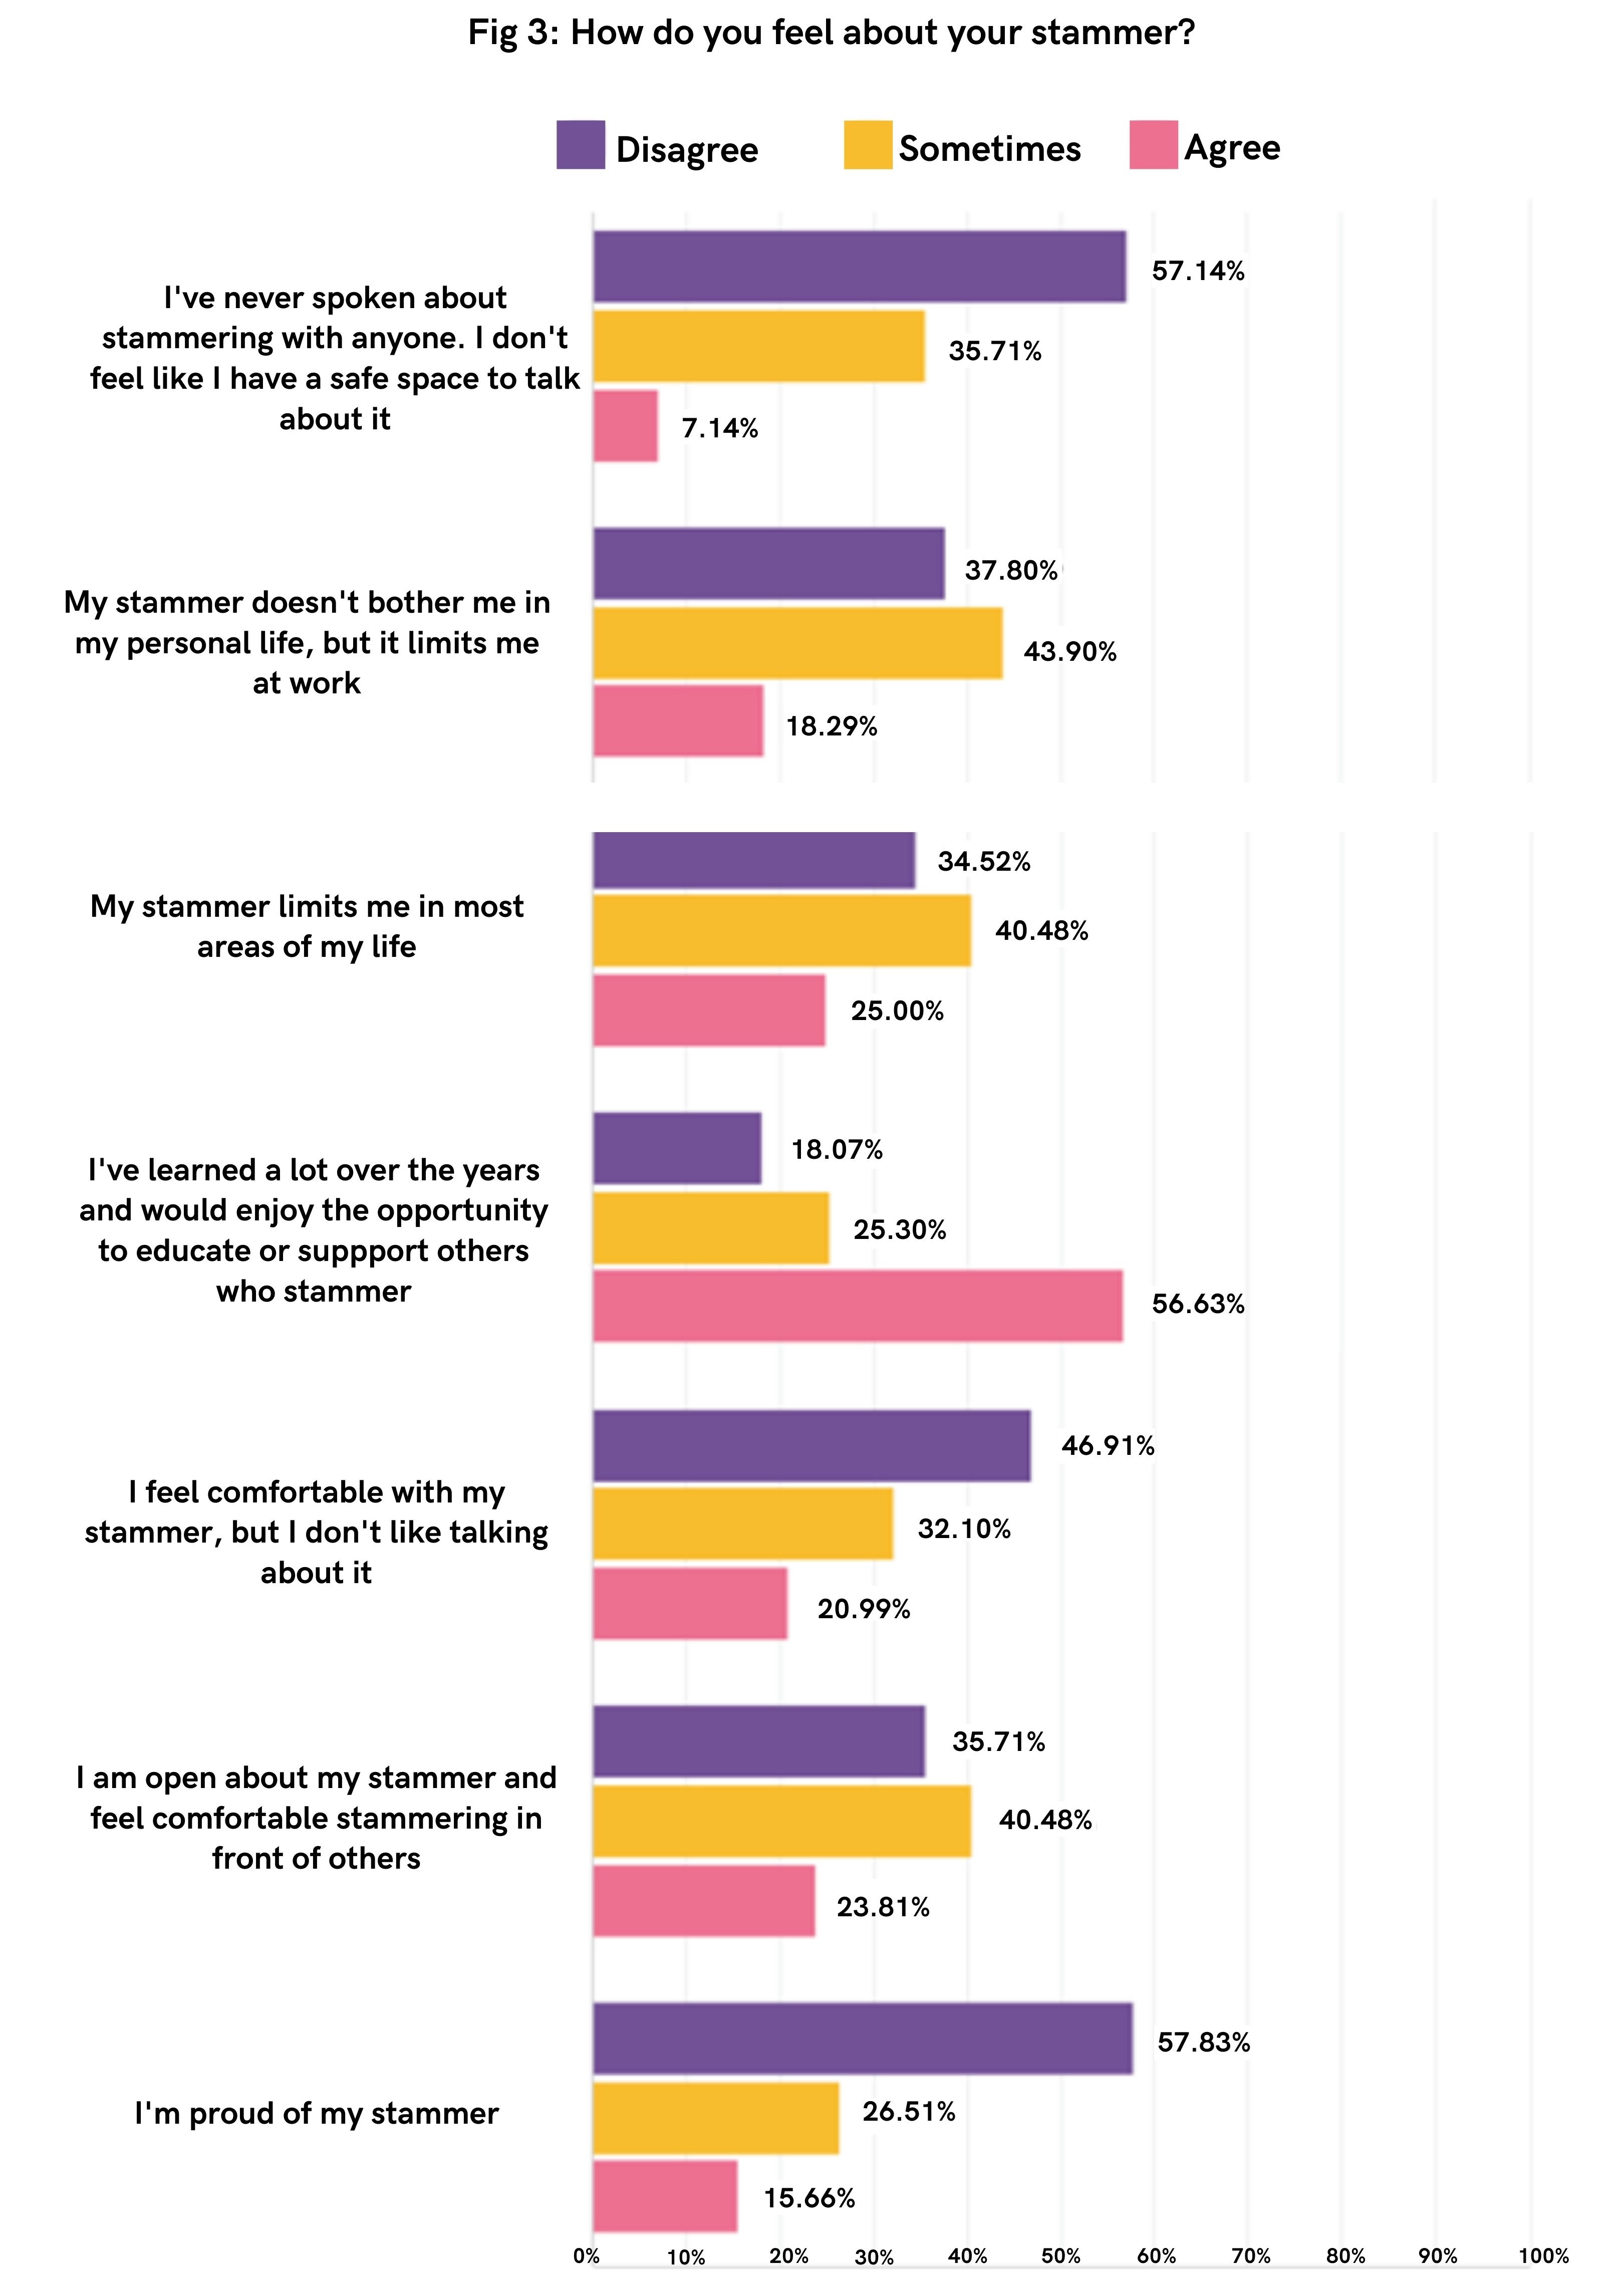 A bar graph showing how people feel about their stammer, from the 2021 survey respondents